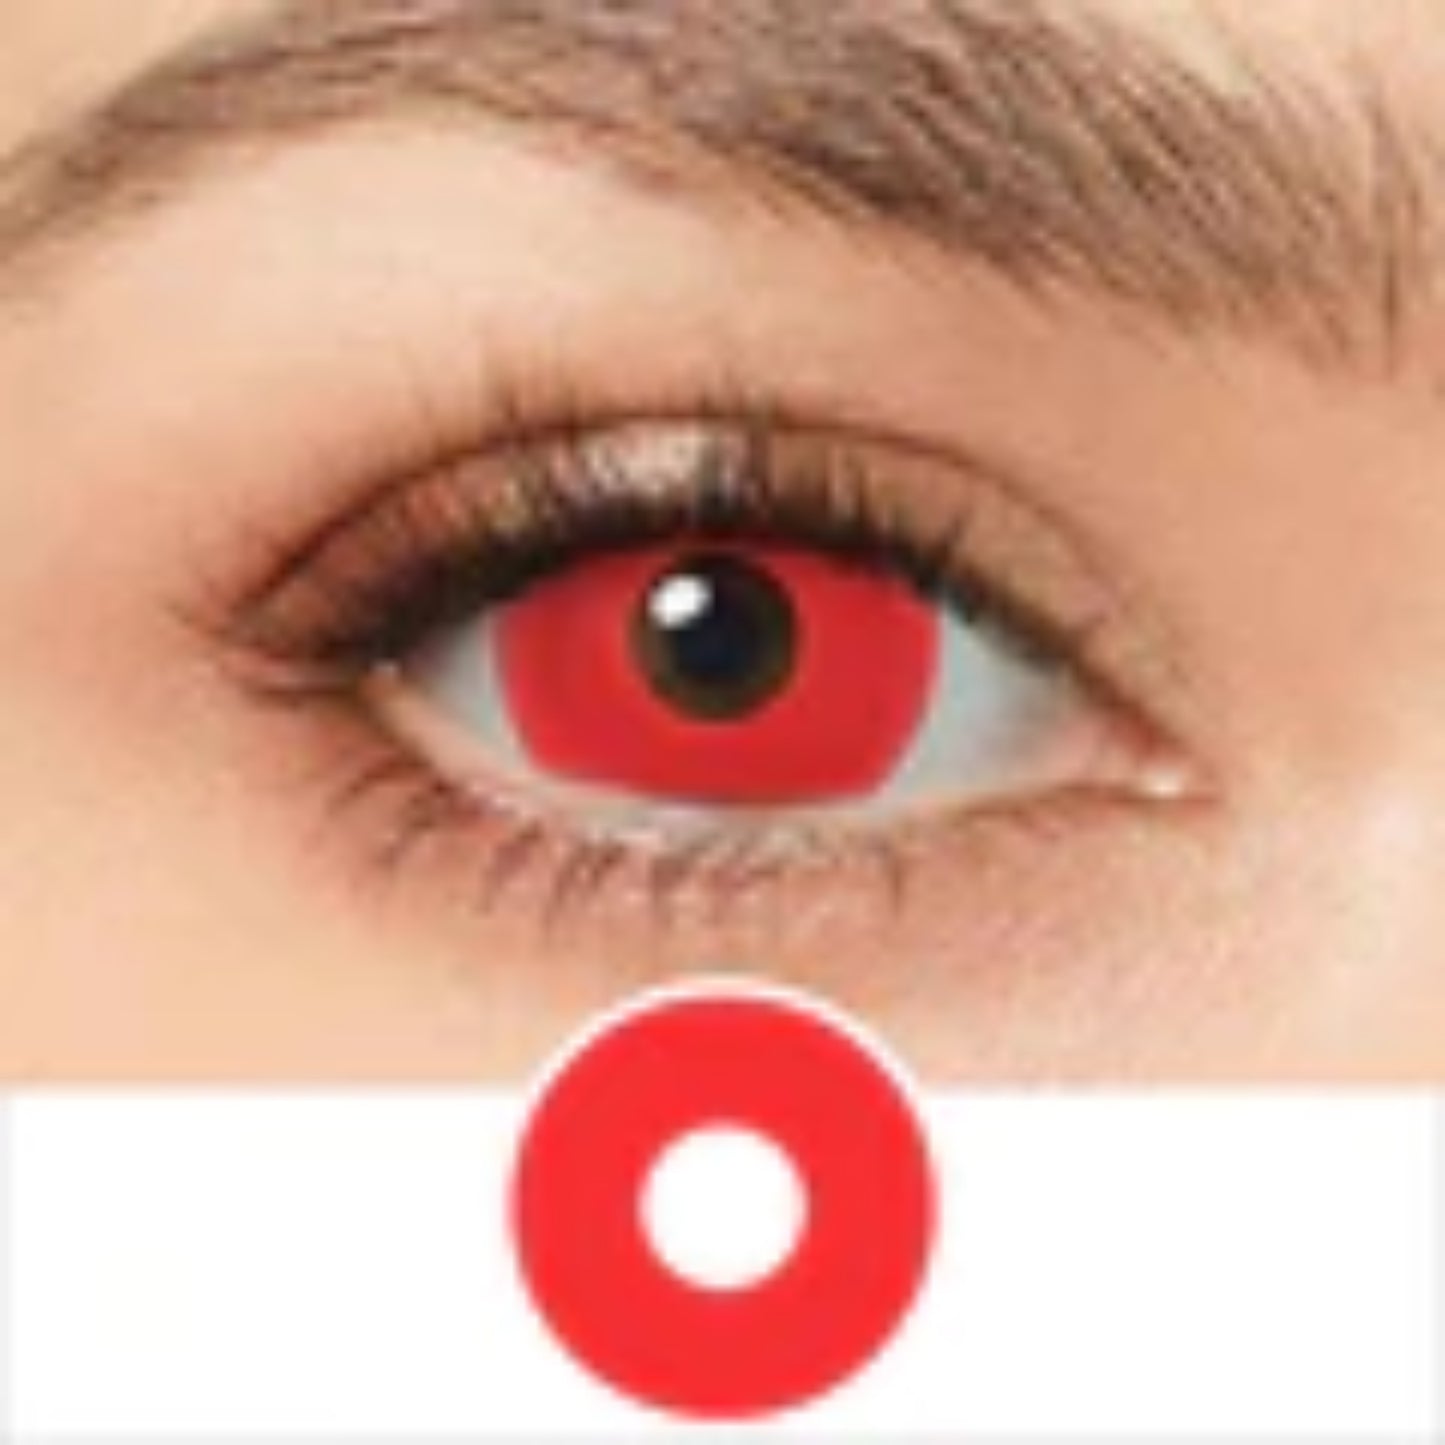 17mm UV Glow Red Mini Sclera Contacts